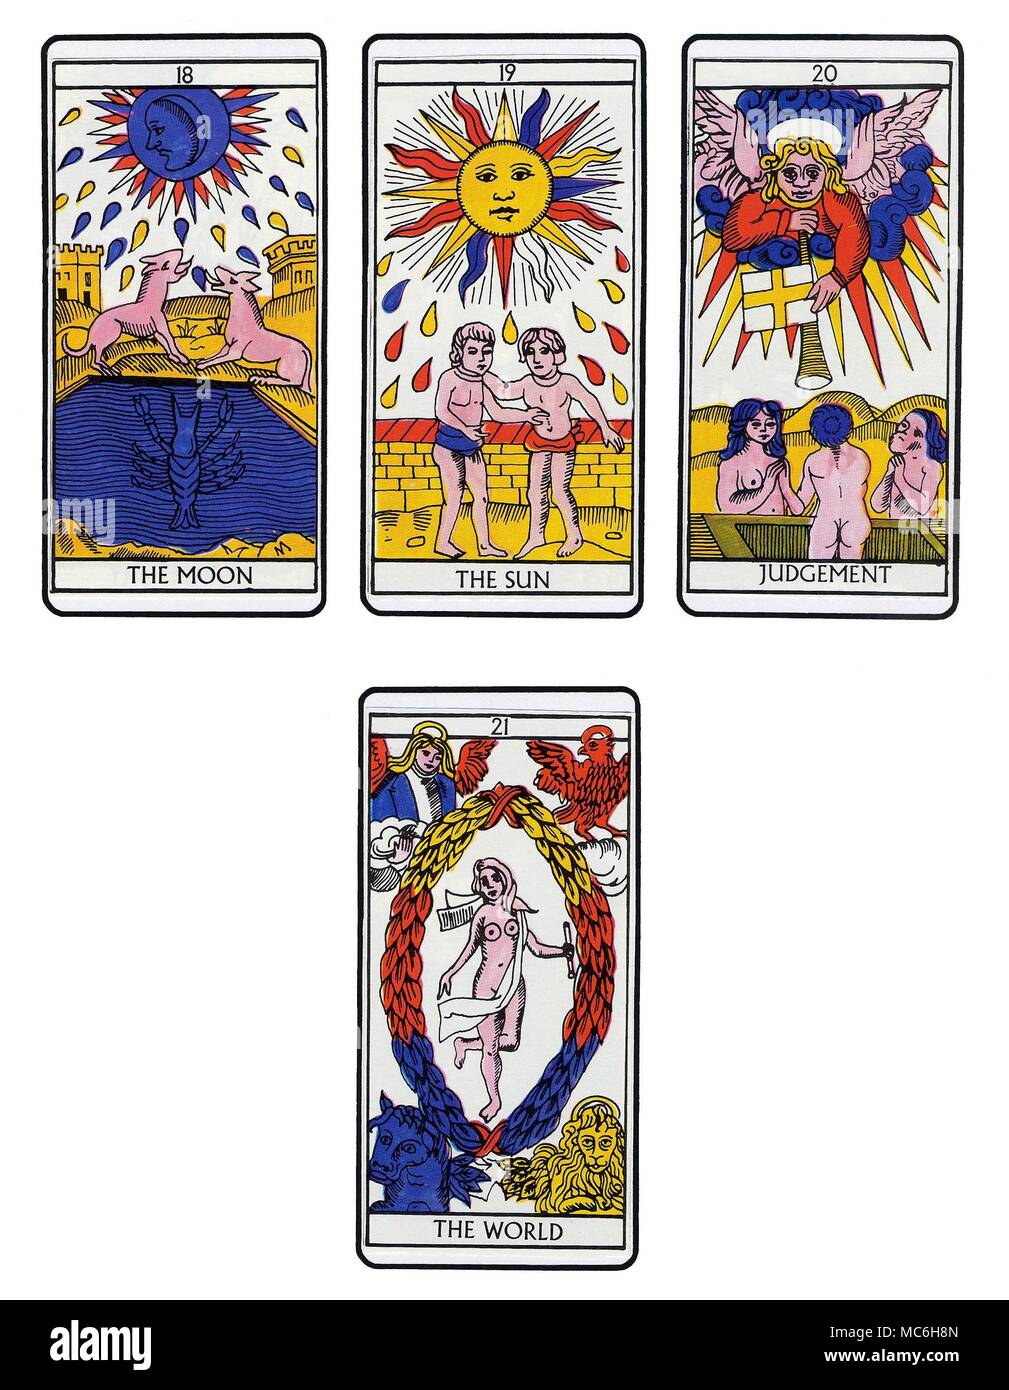 TAROT CARDS - MODERN MARSEILLES DECK Four cards from a complete sequence of Tarot cards in the Marseilles tradition. Top, from left to right - The Moon, The Sun, Judgement and The World. Stock Photo